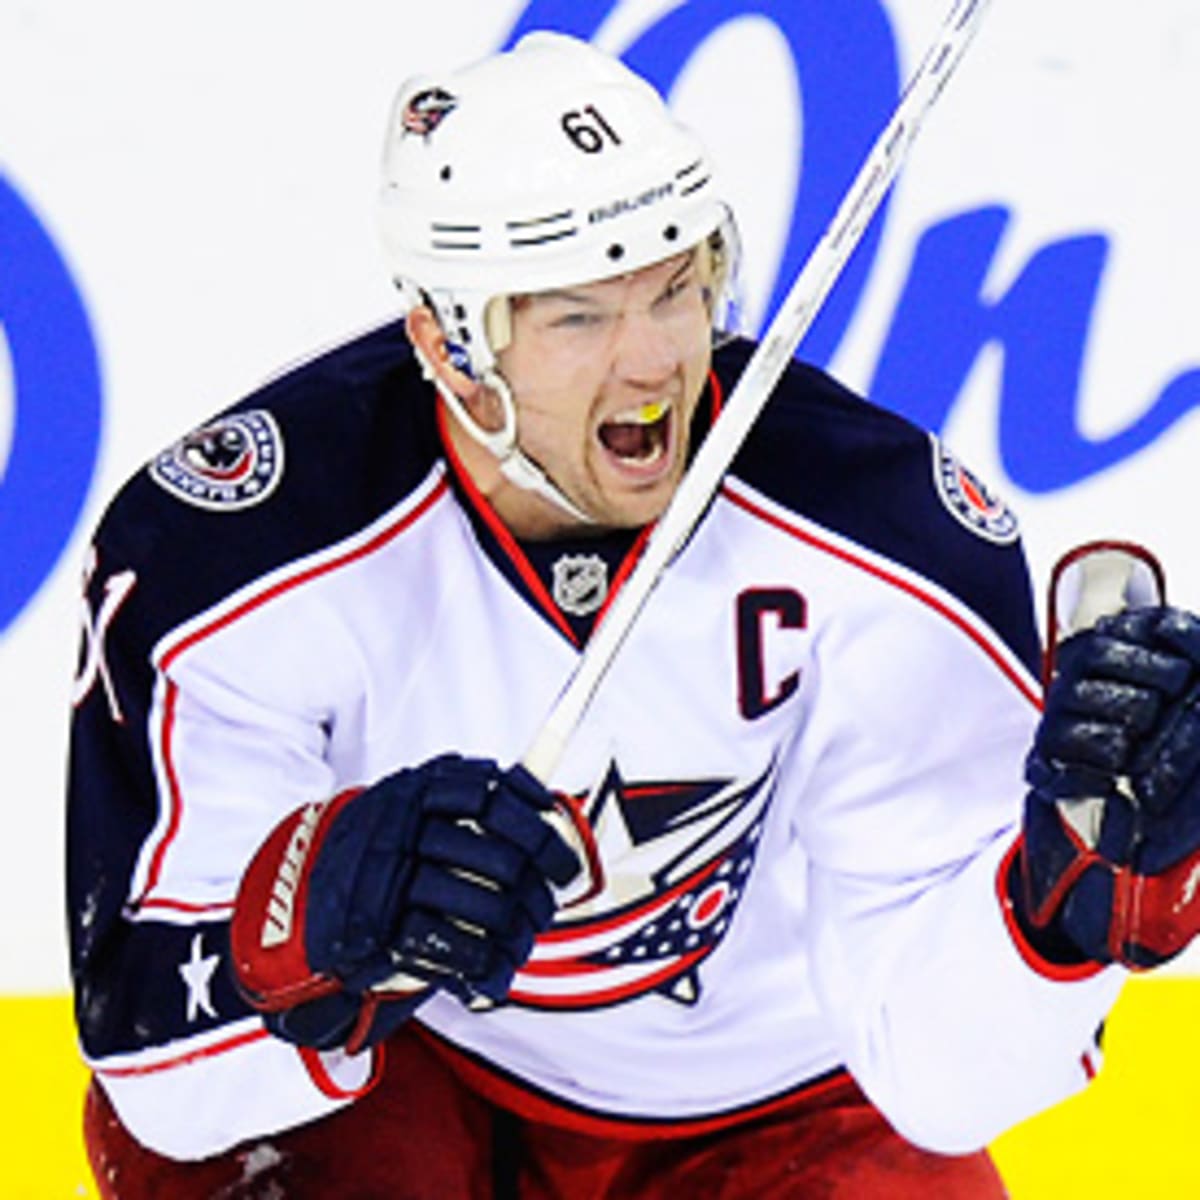 NHL trade deadline: Rick Nash much sought after, but difficult to land